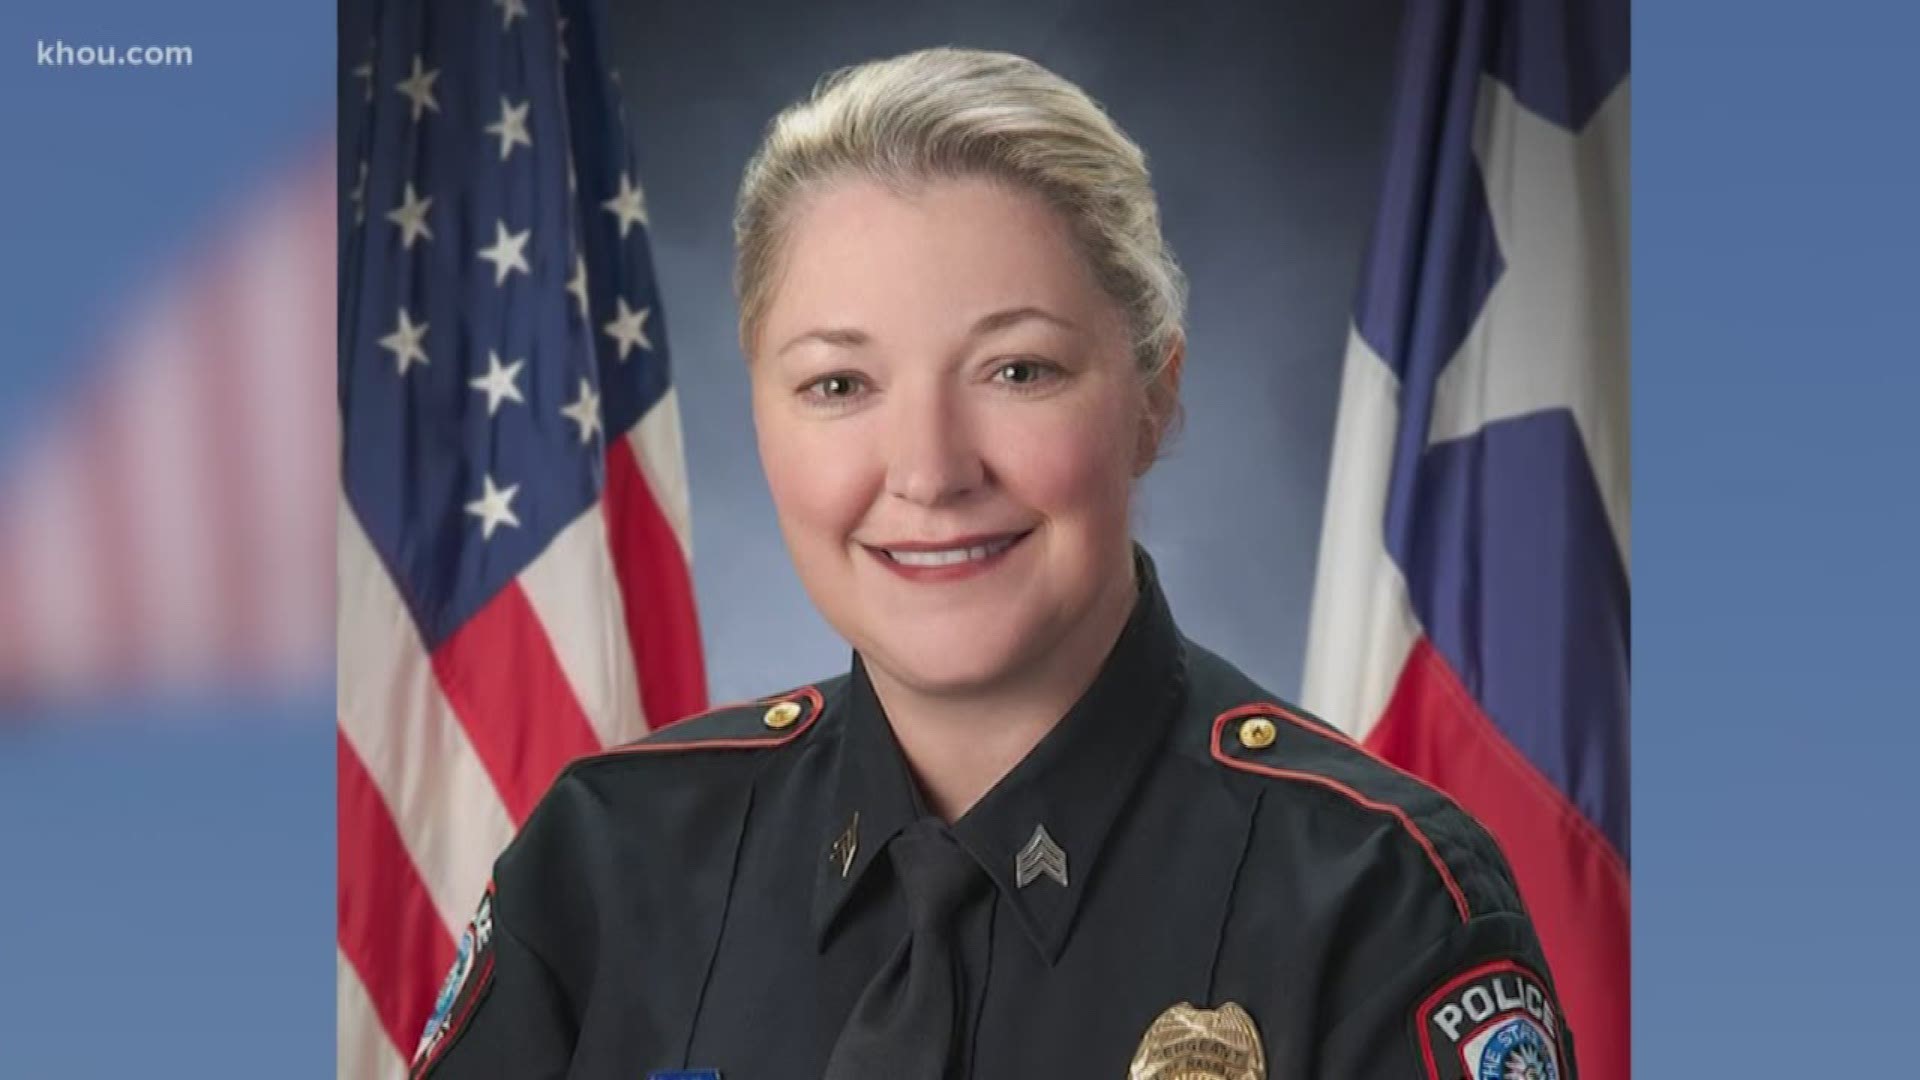 Dozens are posting on social media, remembering their friend Sgt. Kaila Sullivan, a Nassau Bay police officer who was hit and killed by a suspect.